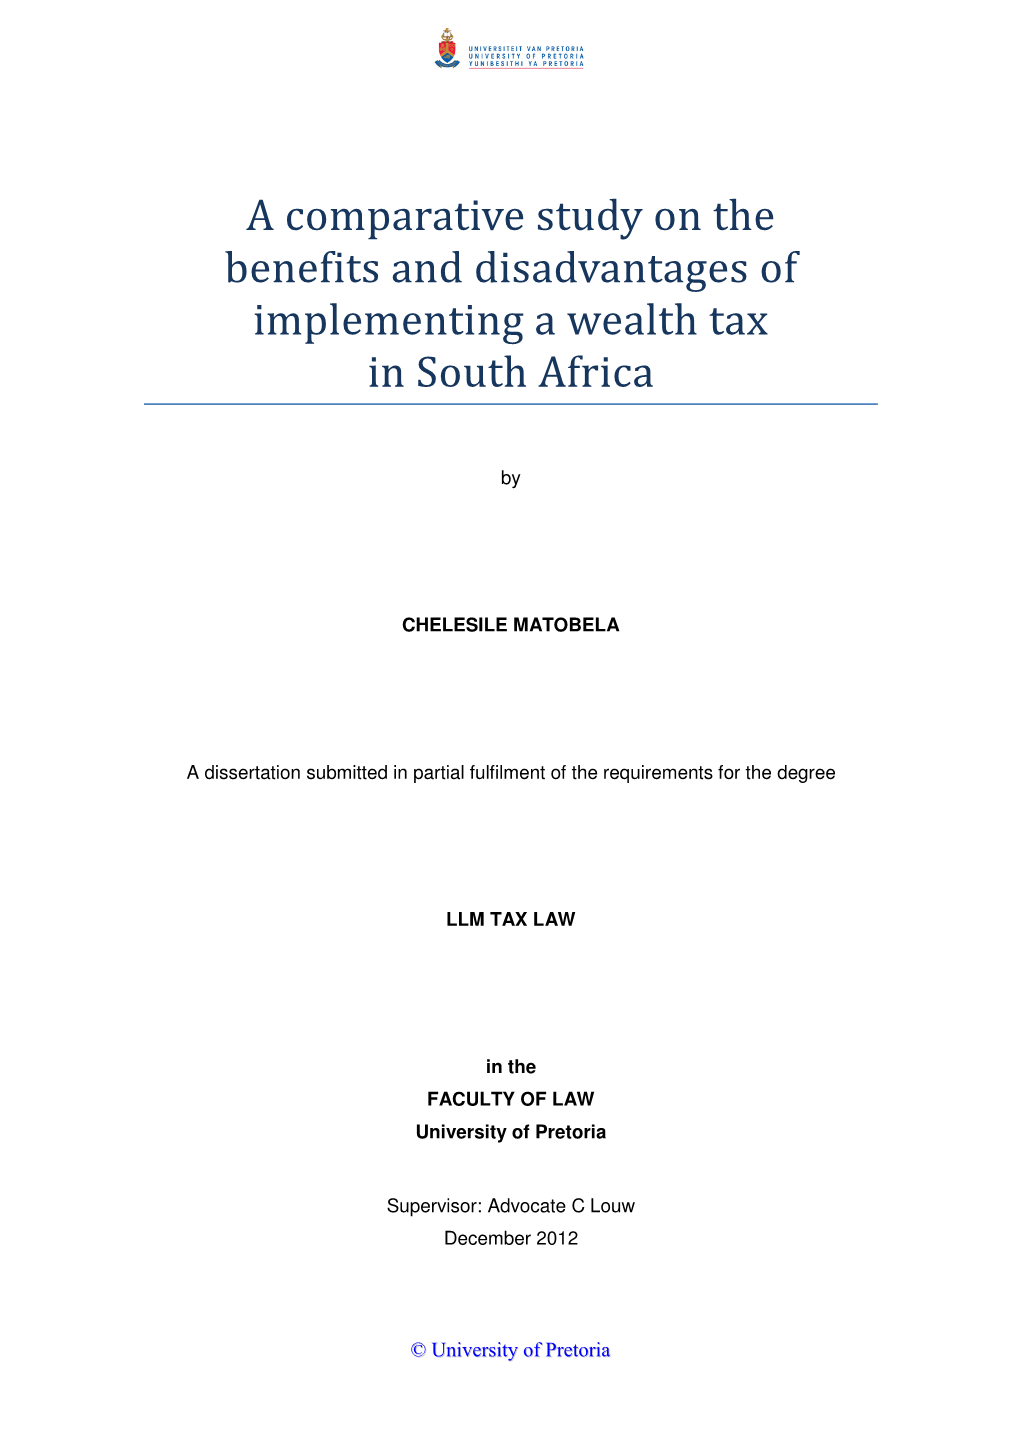 A Comparative Study on the Benefits and Disadvantages of Implementing a Wealth Tax in South Africa